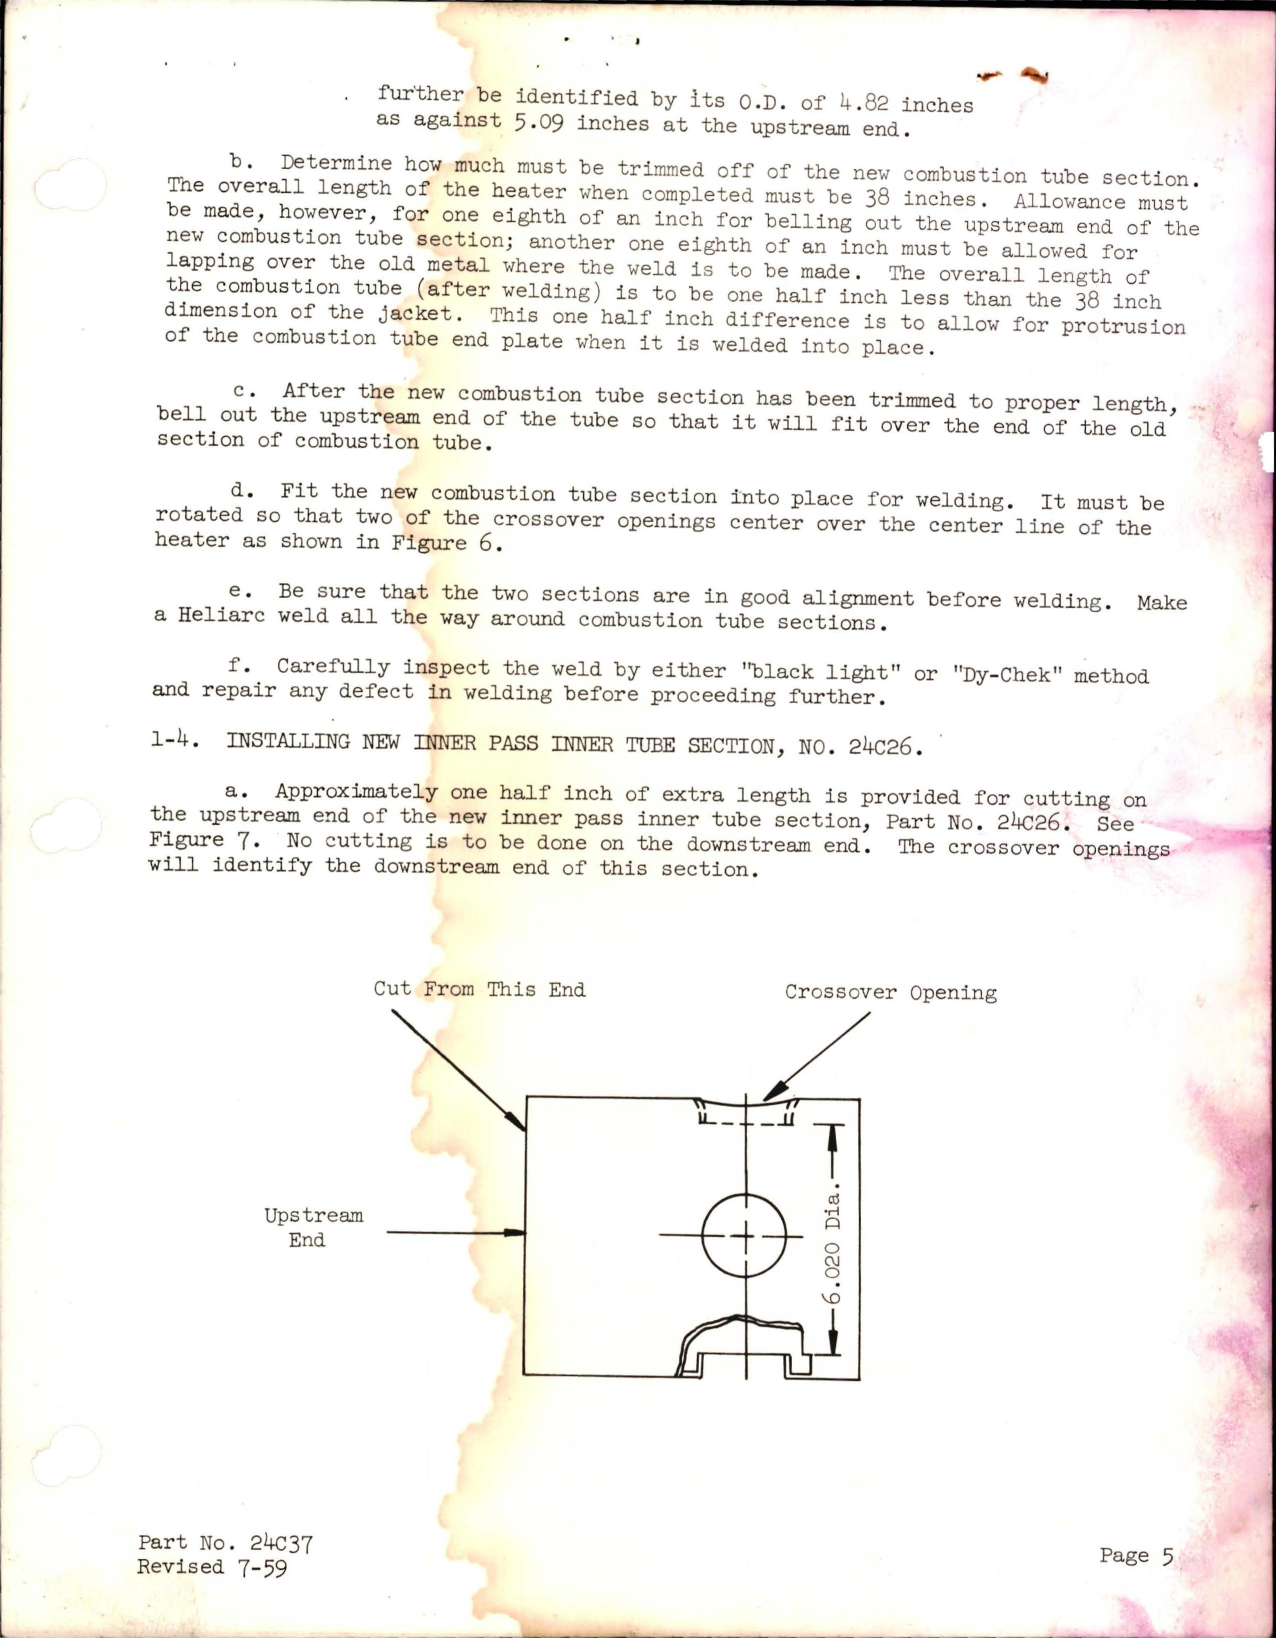 Sample page 5 from AirCorps Library document: Installation Instructions for DC-6 Aircraft Heater Replacement Kit - 23C57, A23C57, and B23C57